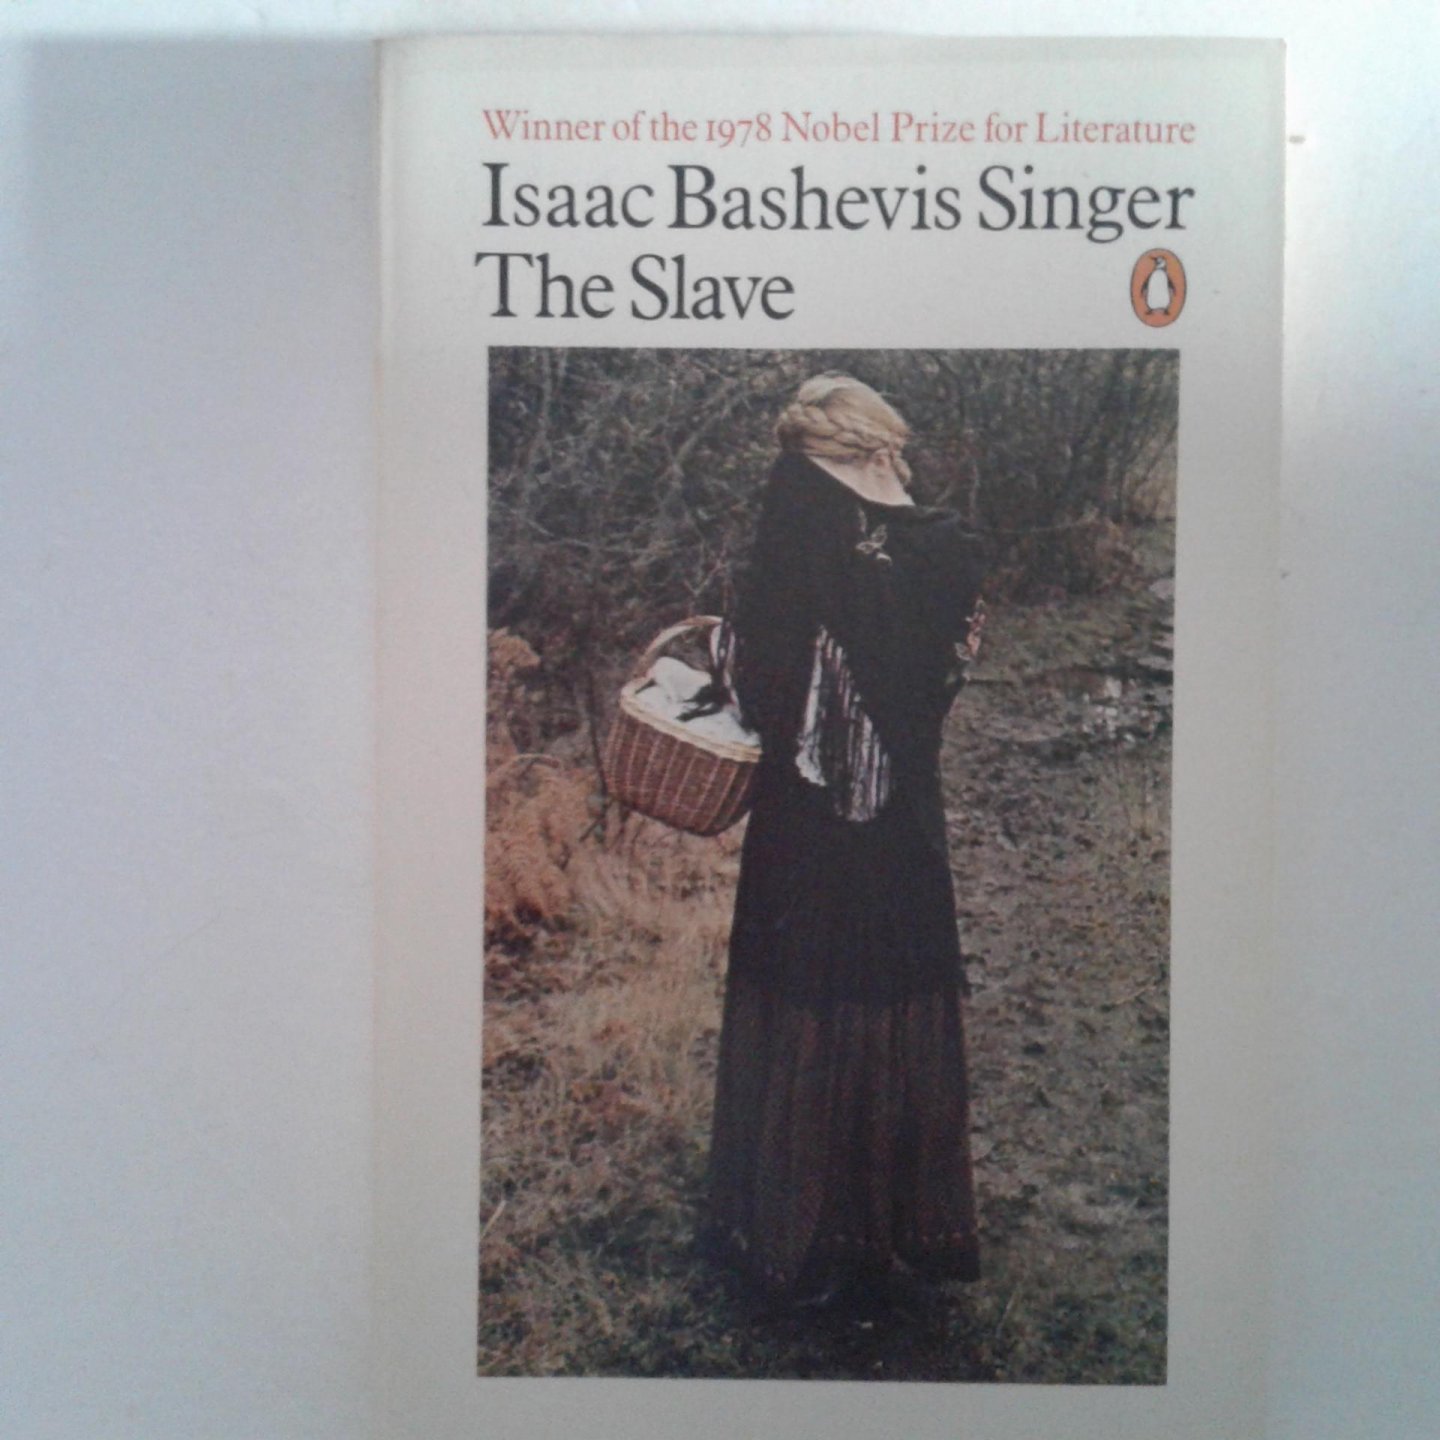 singer, Isaac Bashevis - The Slave